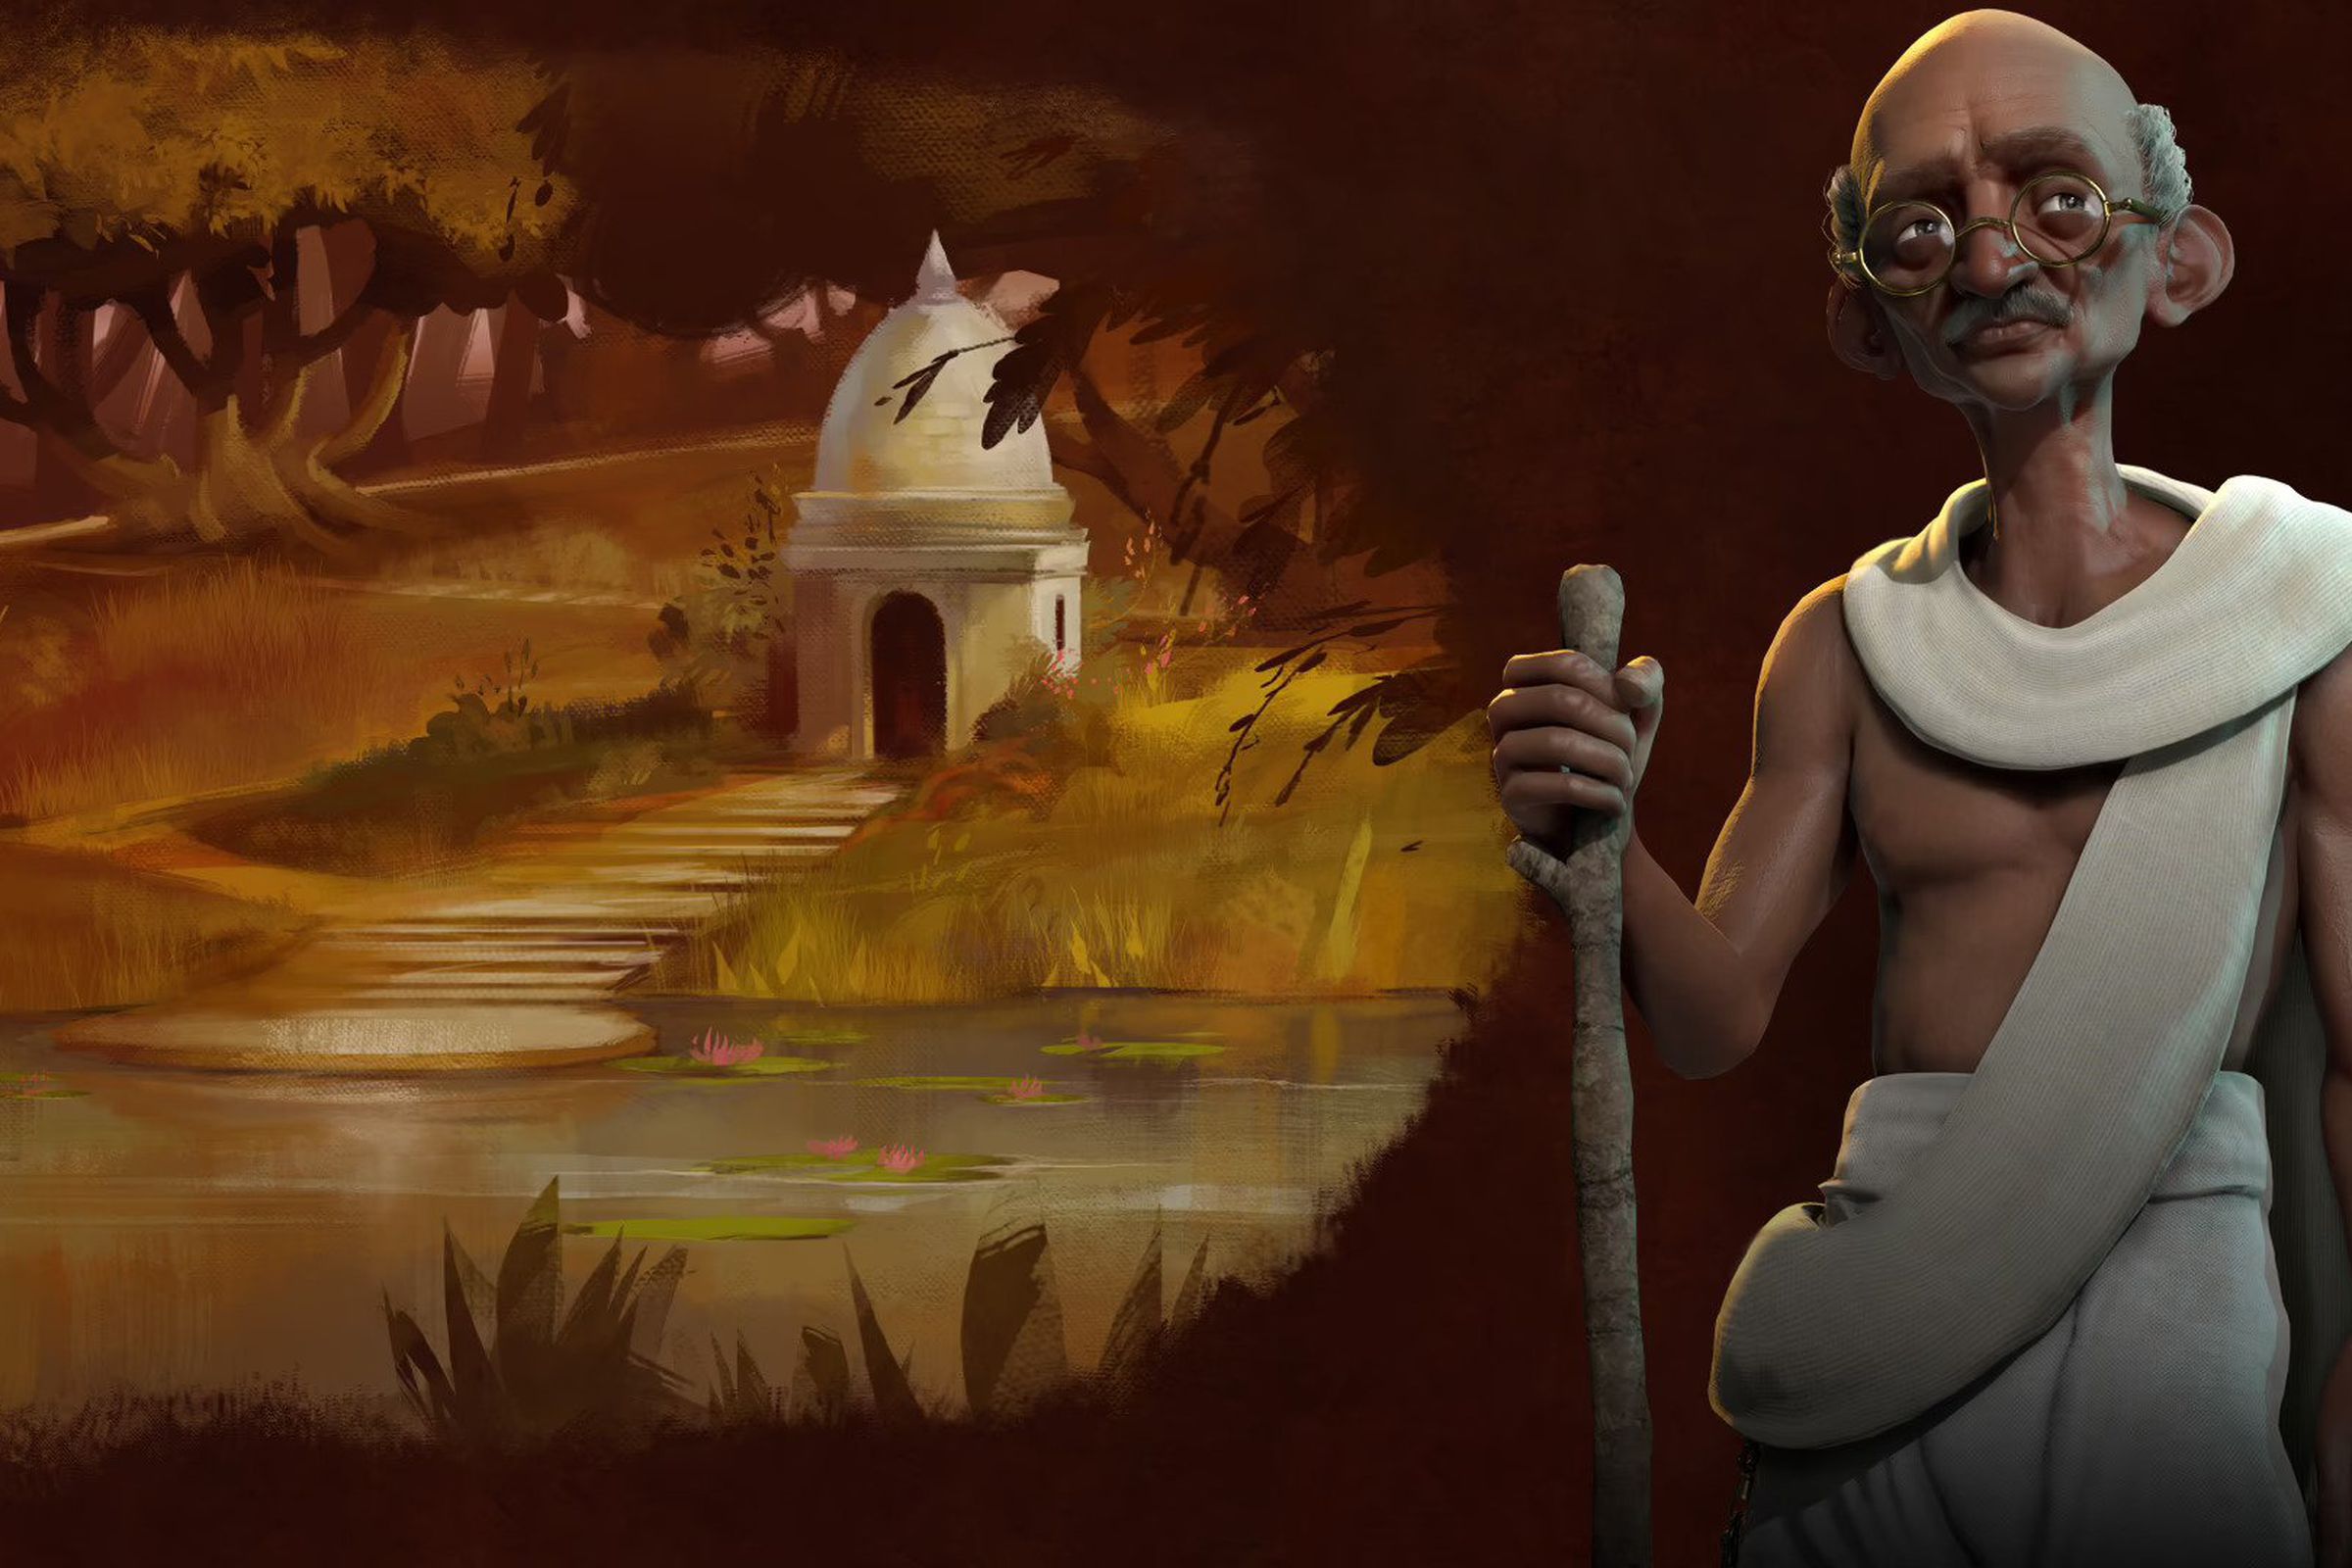 Key art from Sid Meier’s Civilization VI featuring a stylized render of Mahatma Gandhi in his trademark white robes carrying a walking stick